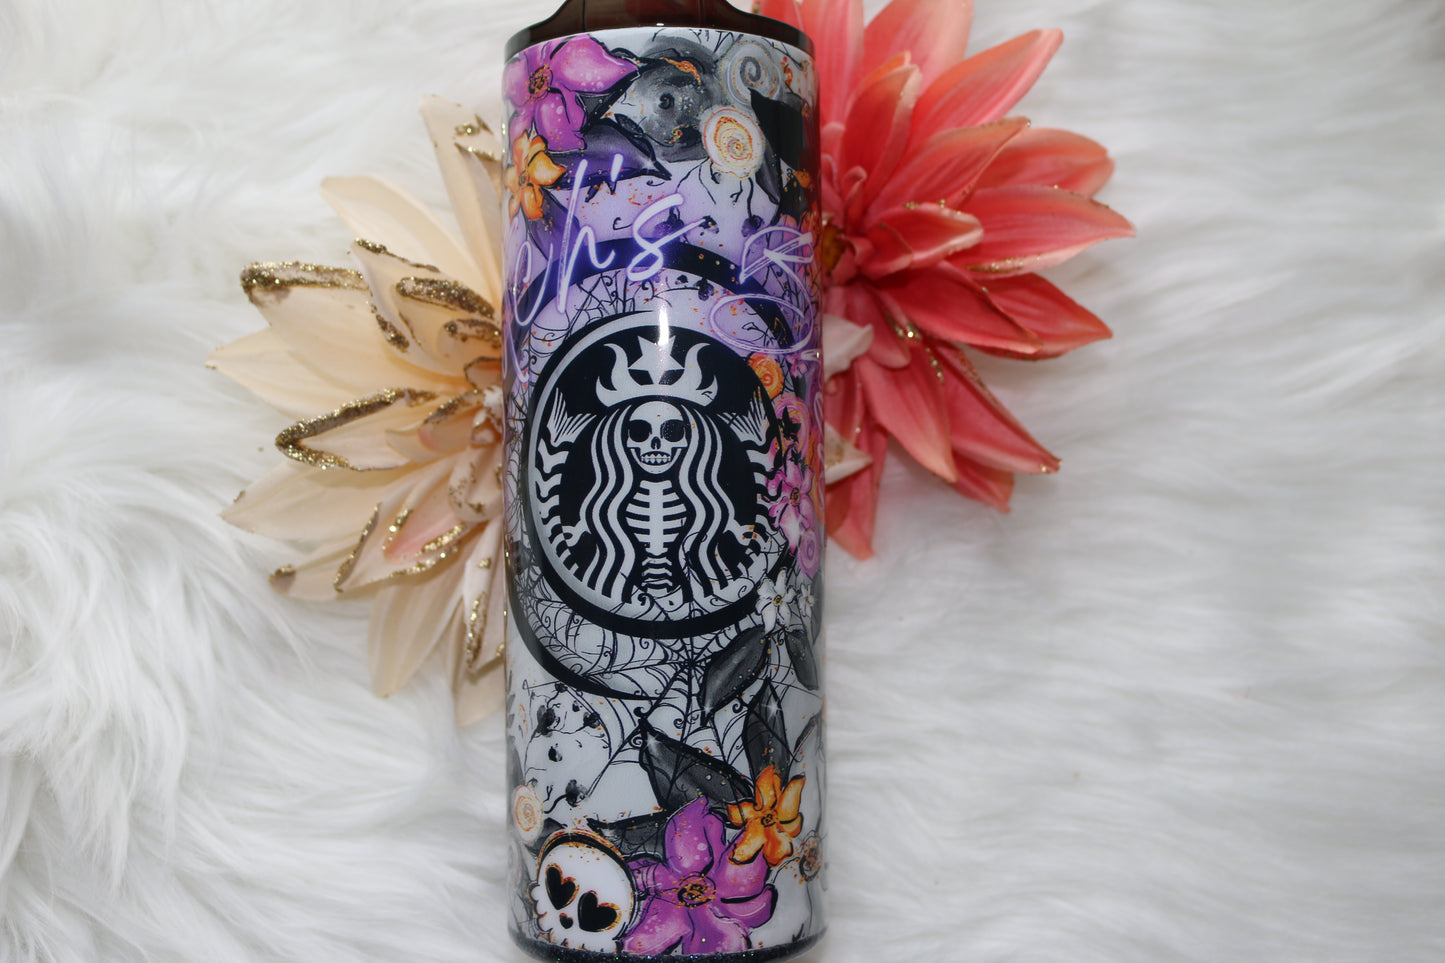 20 oz "Witches Brew" Stainless Steal Tumbler